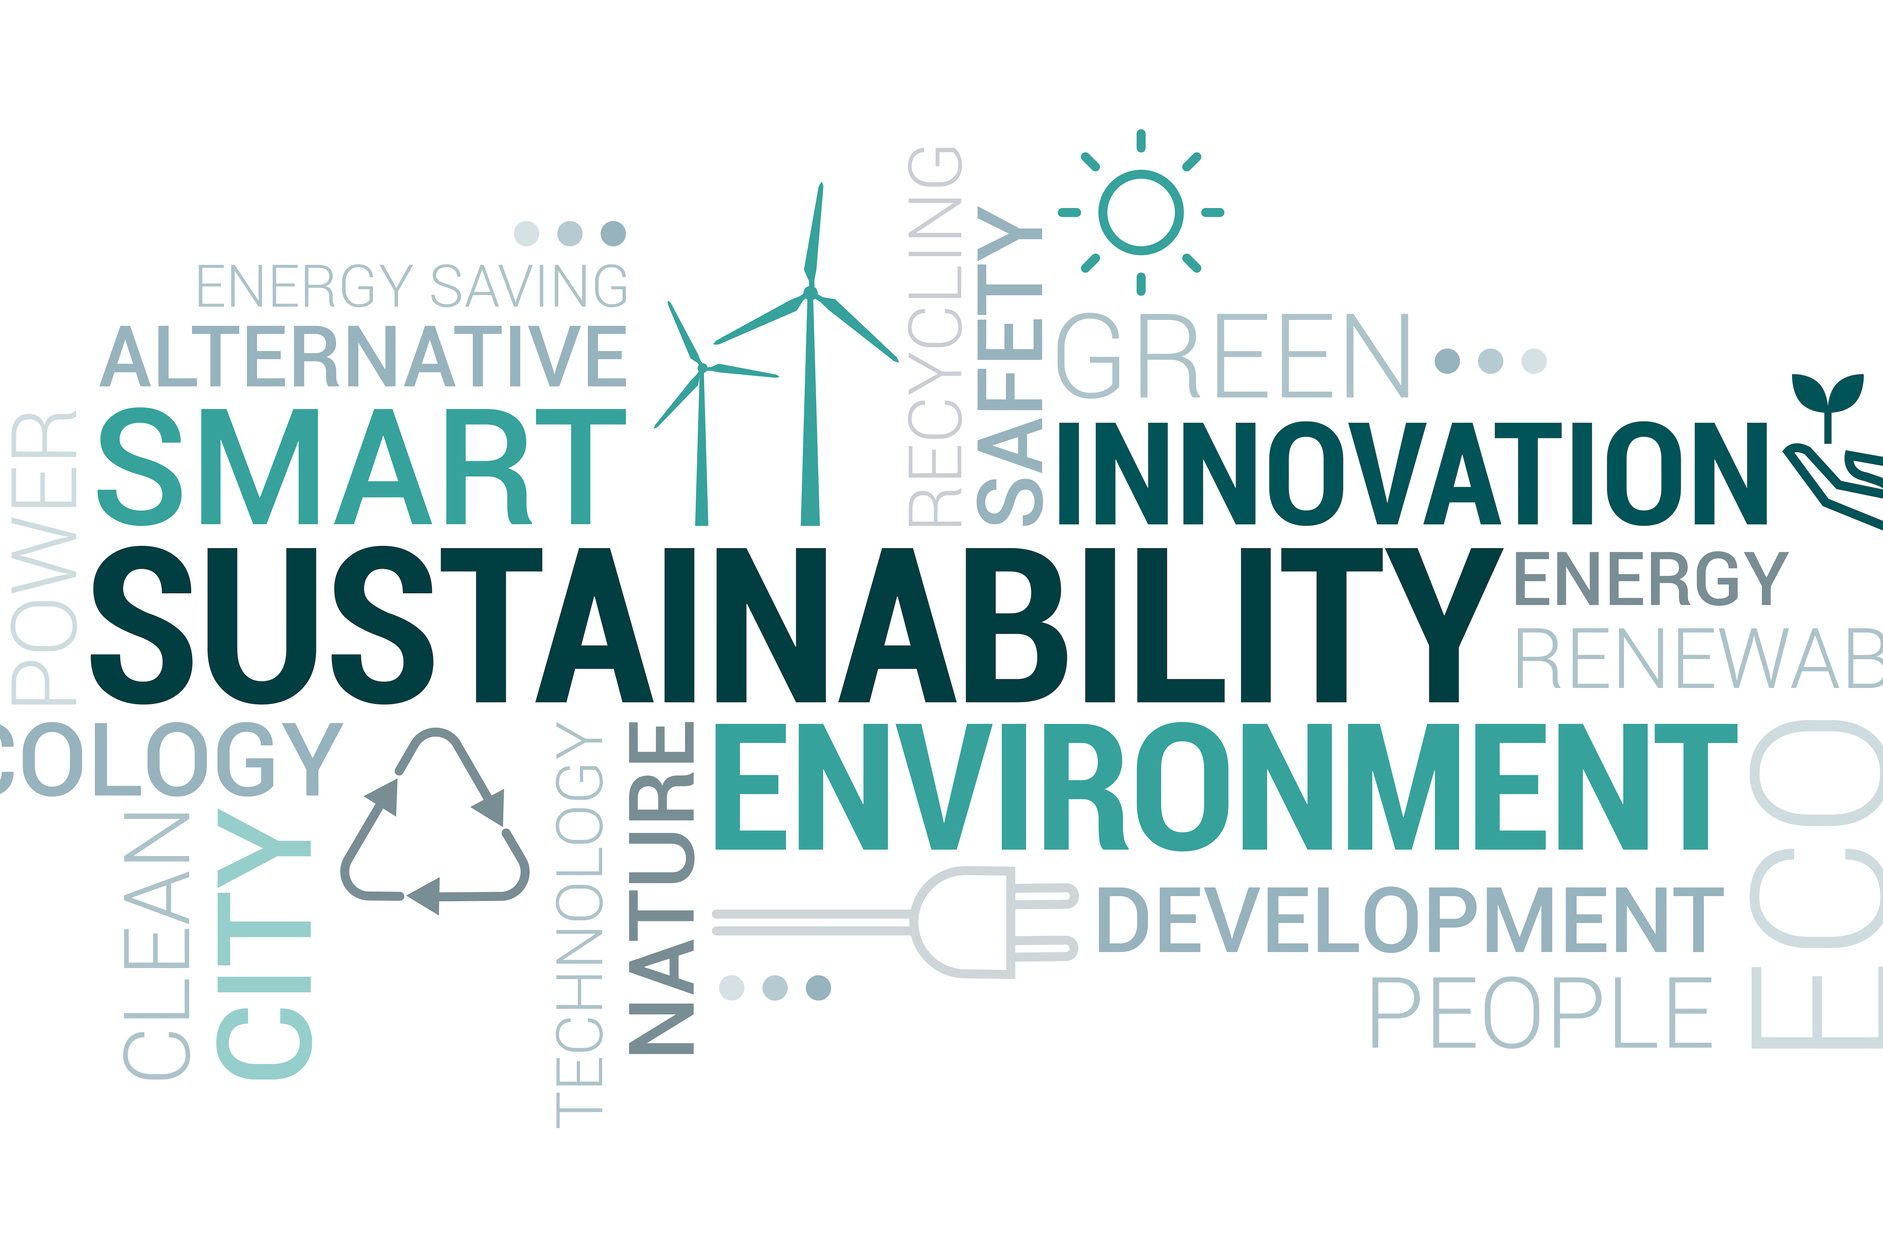 Environment, smart cities and sustainability tag cloud with icons and concepts